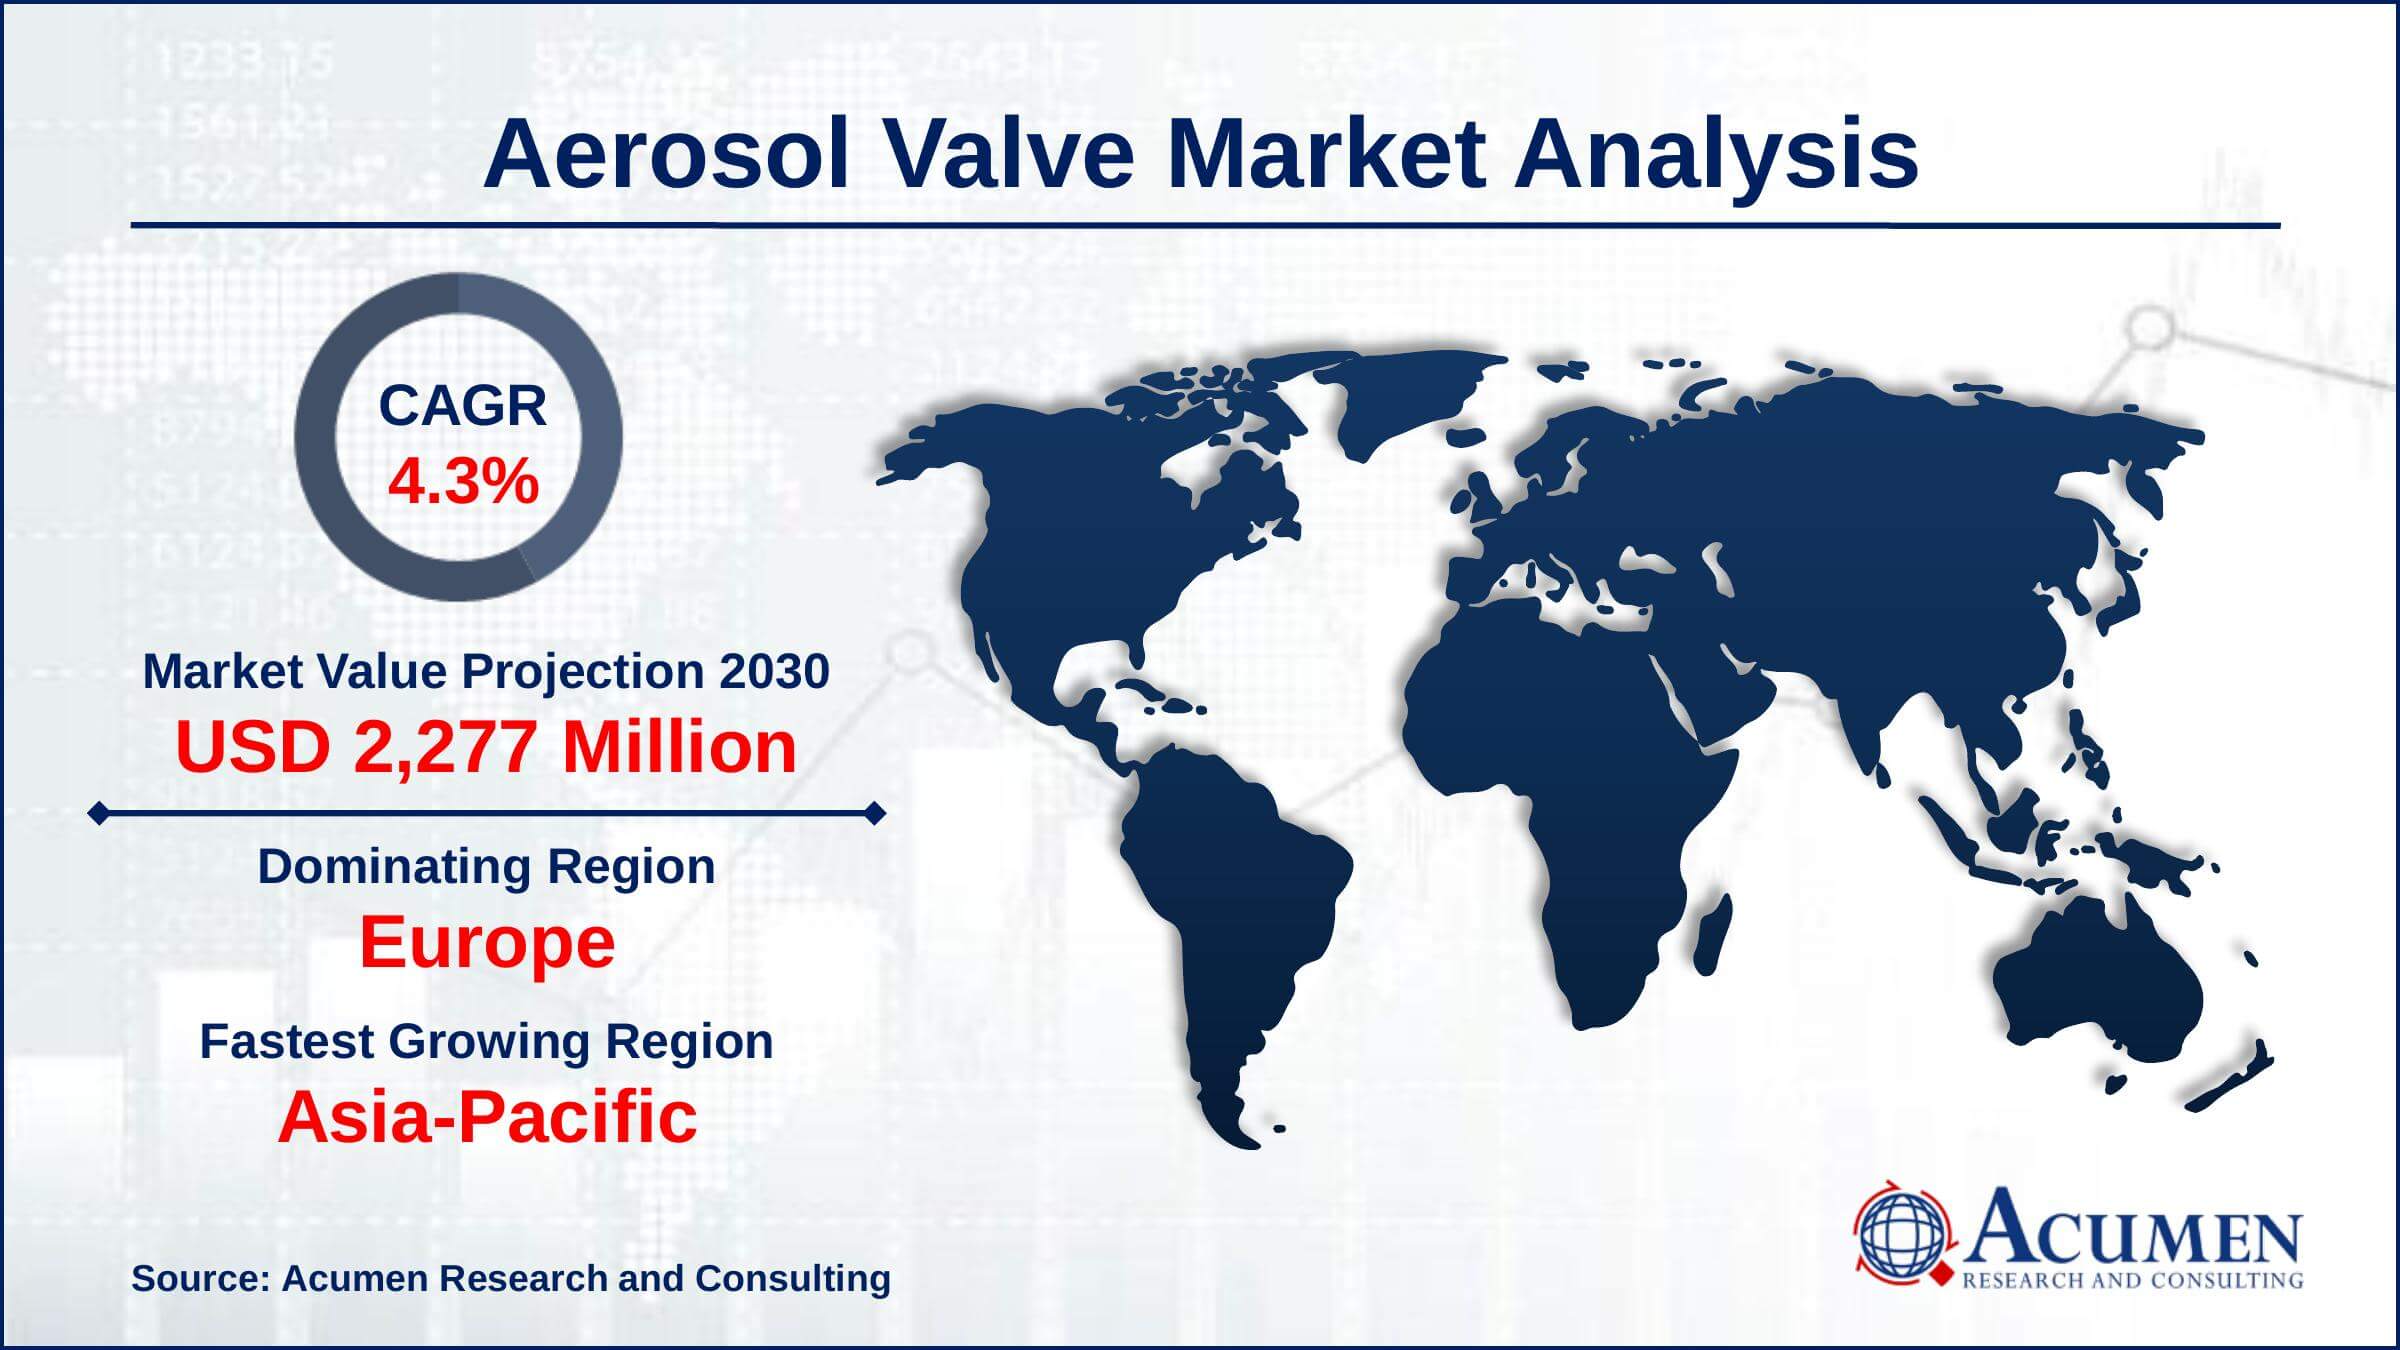 Europe aerosol valve market share accounted for over 37% of total market shares in 2021